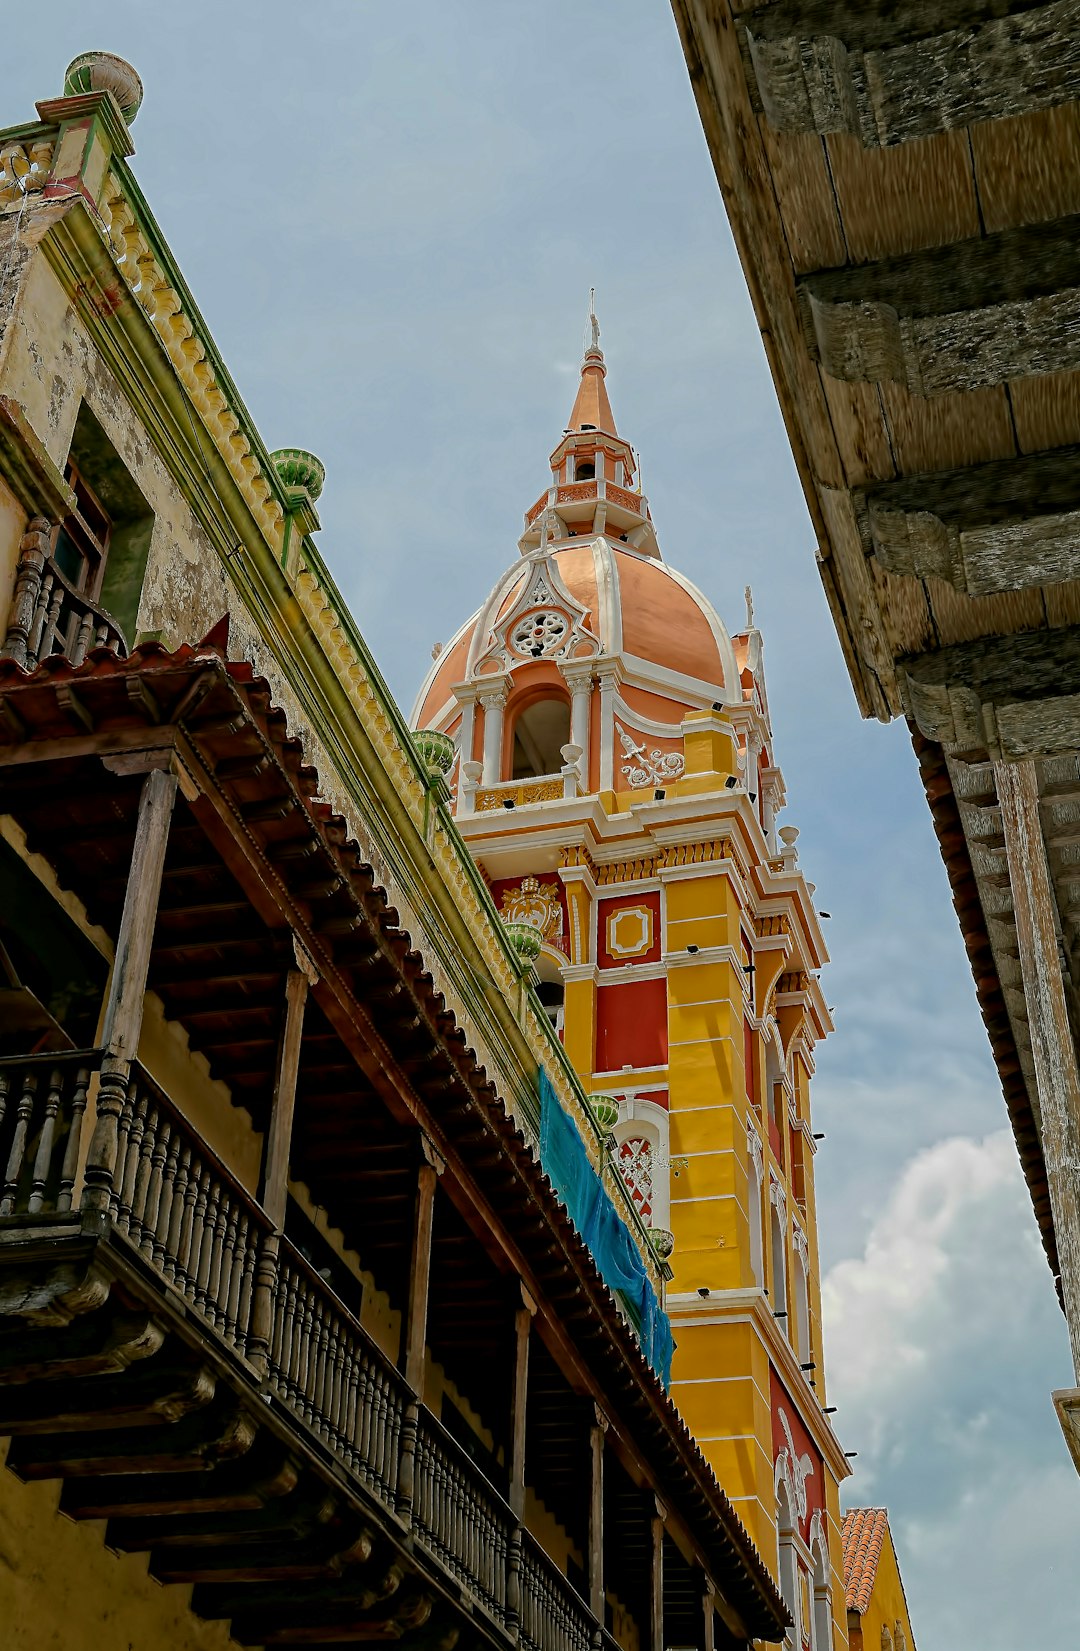 Travel Tips and Stories of Walls of Cartagena in Colombia